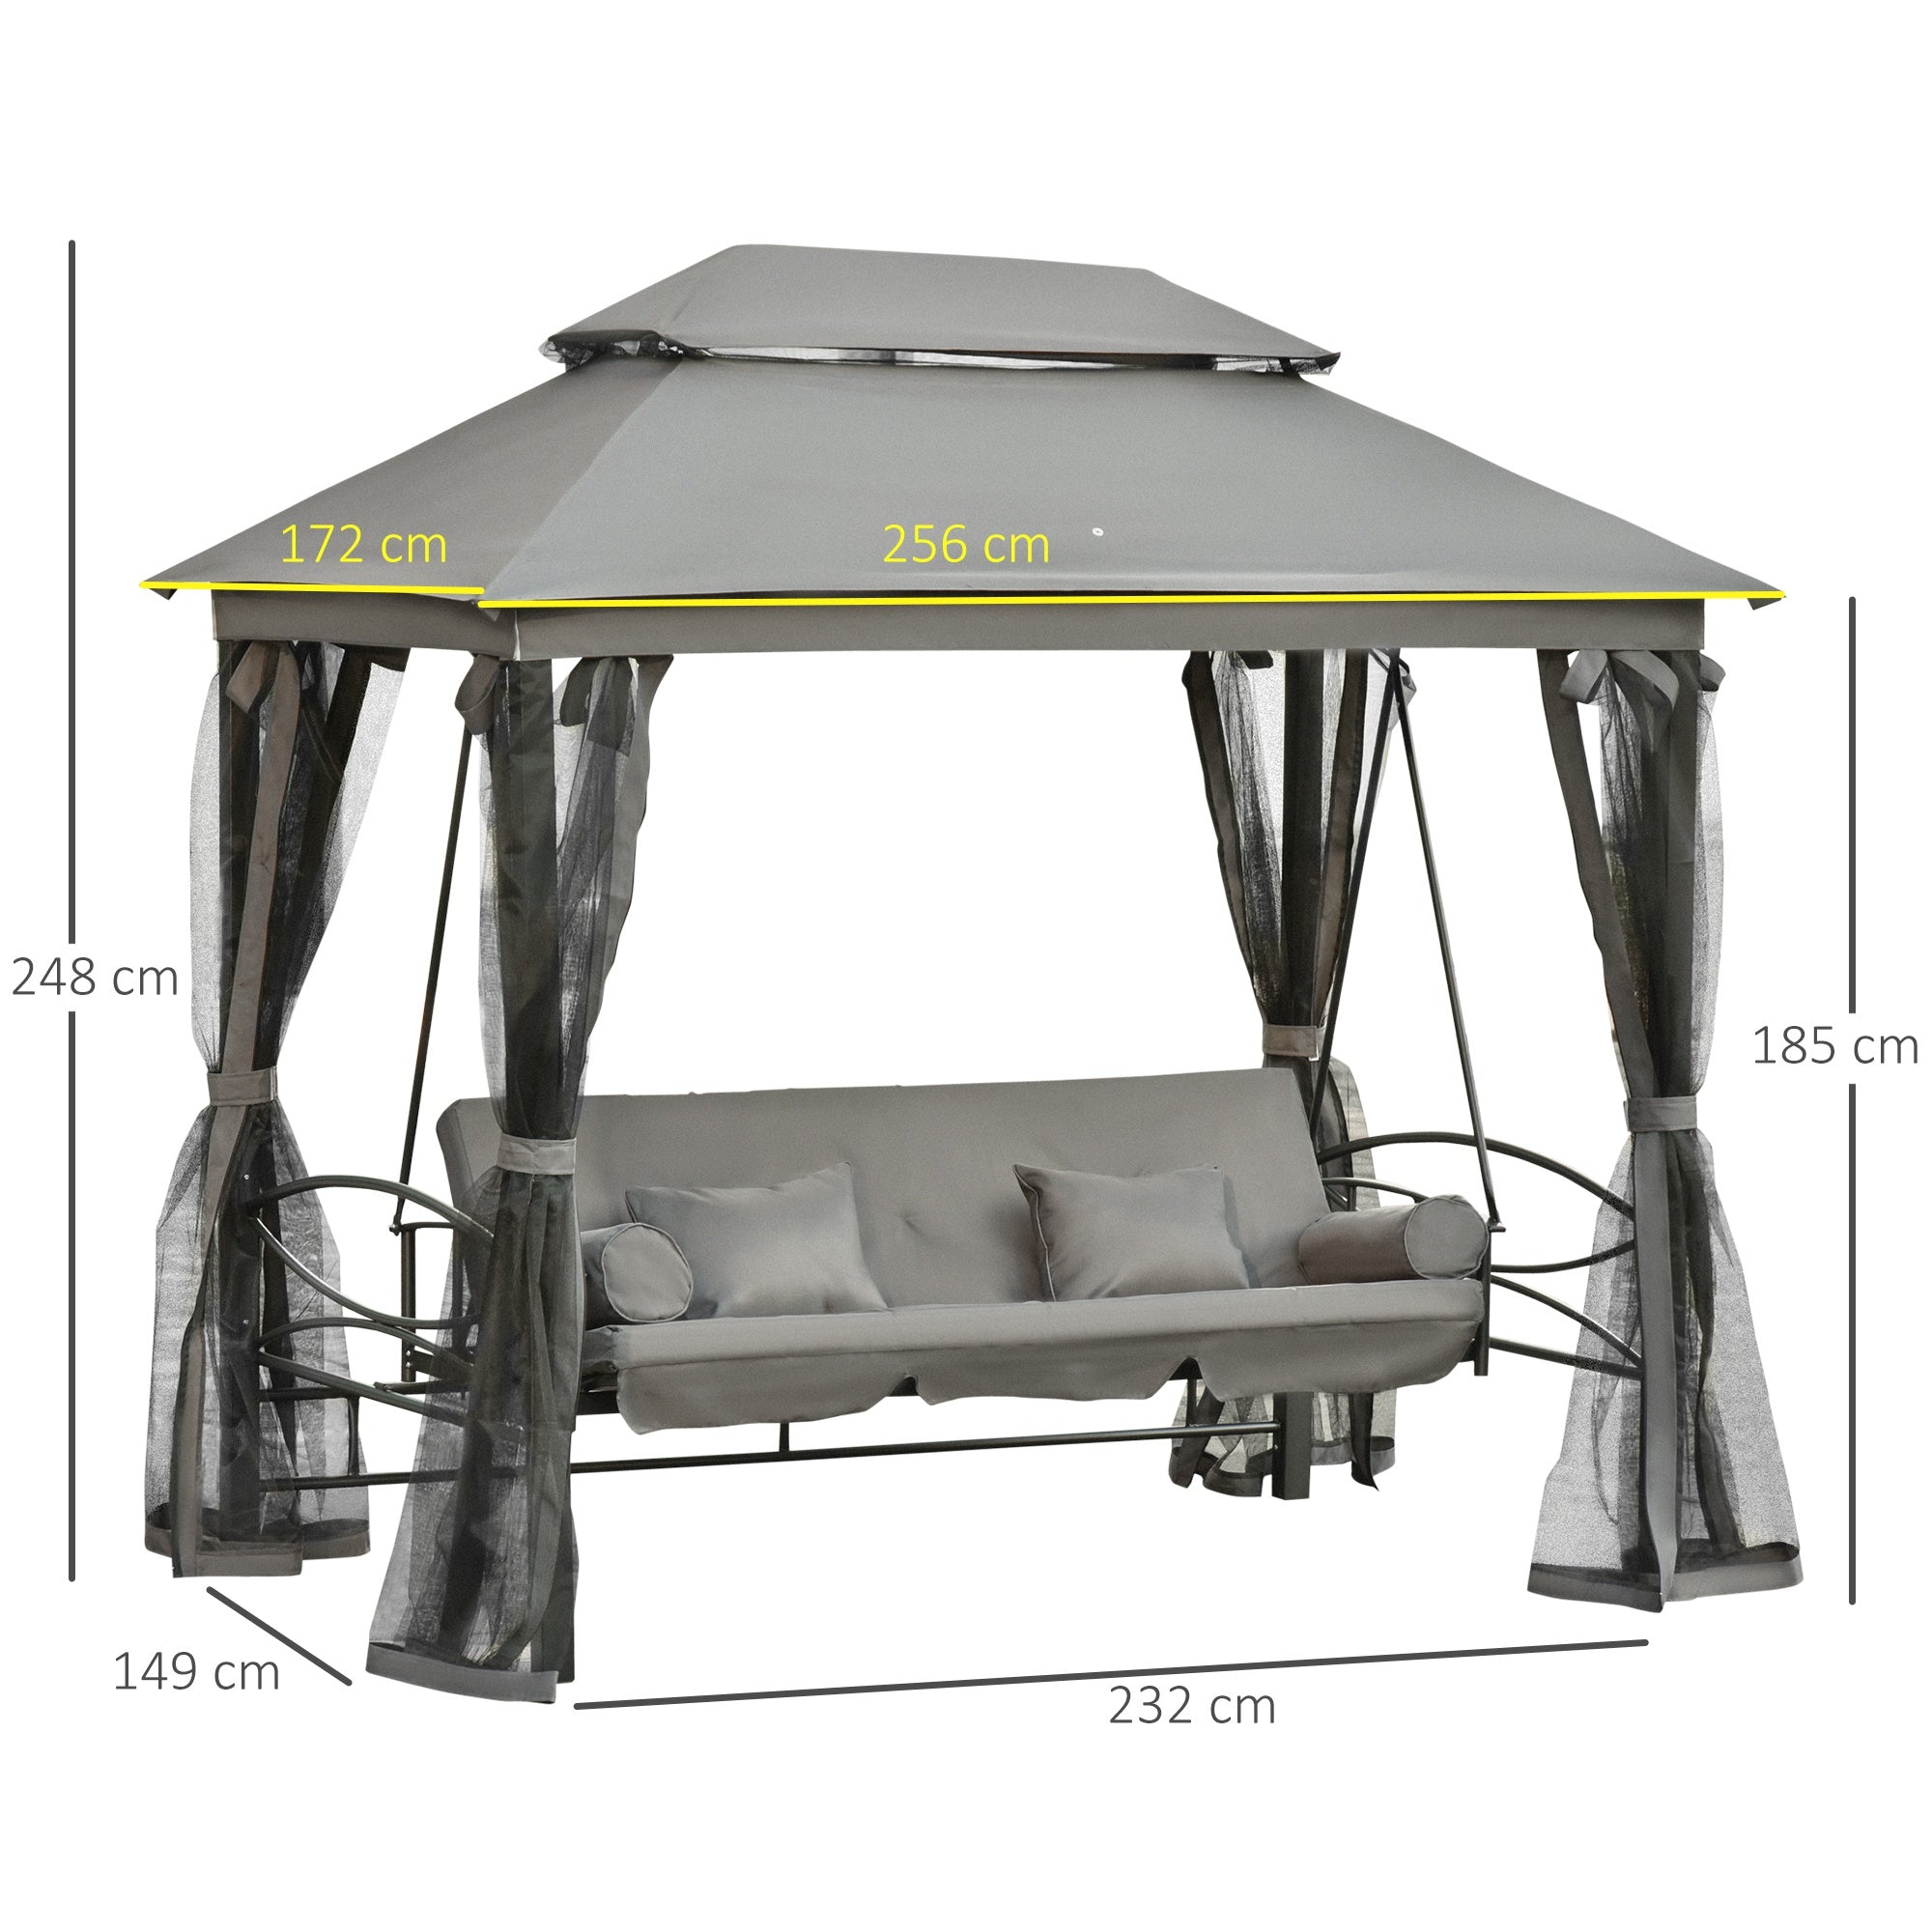 Outsunny 3 Seater Swing Chair Hammock Gazebo Patio Bench Outdoor with Double Tier Canopy, Cushioned Seat, Mesh Sidewalls, Grey - Inspirely